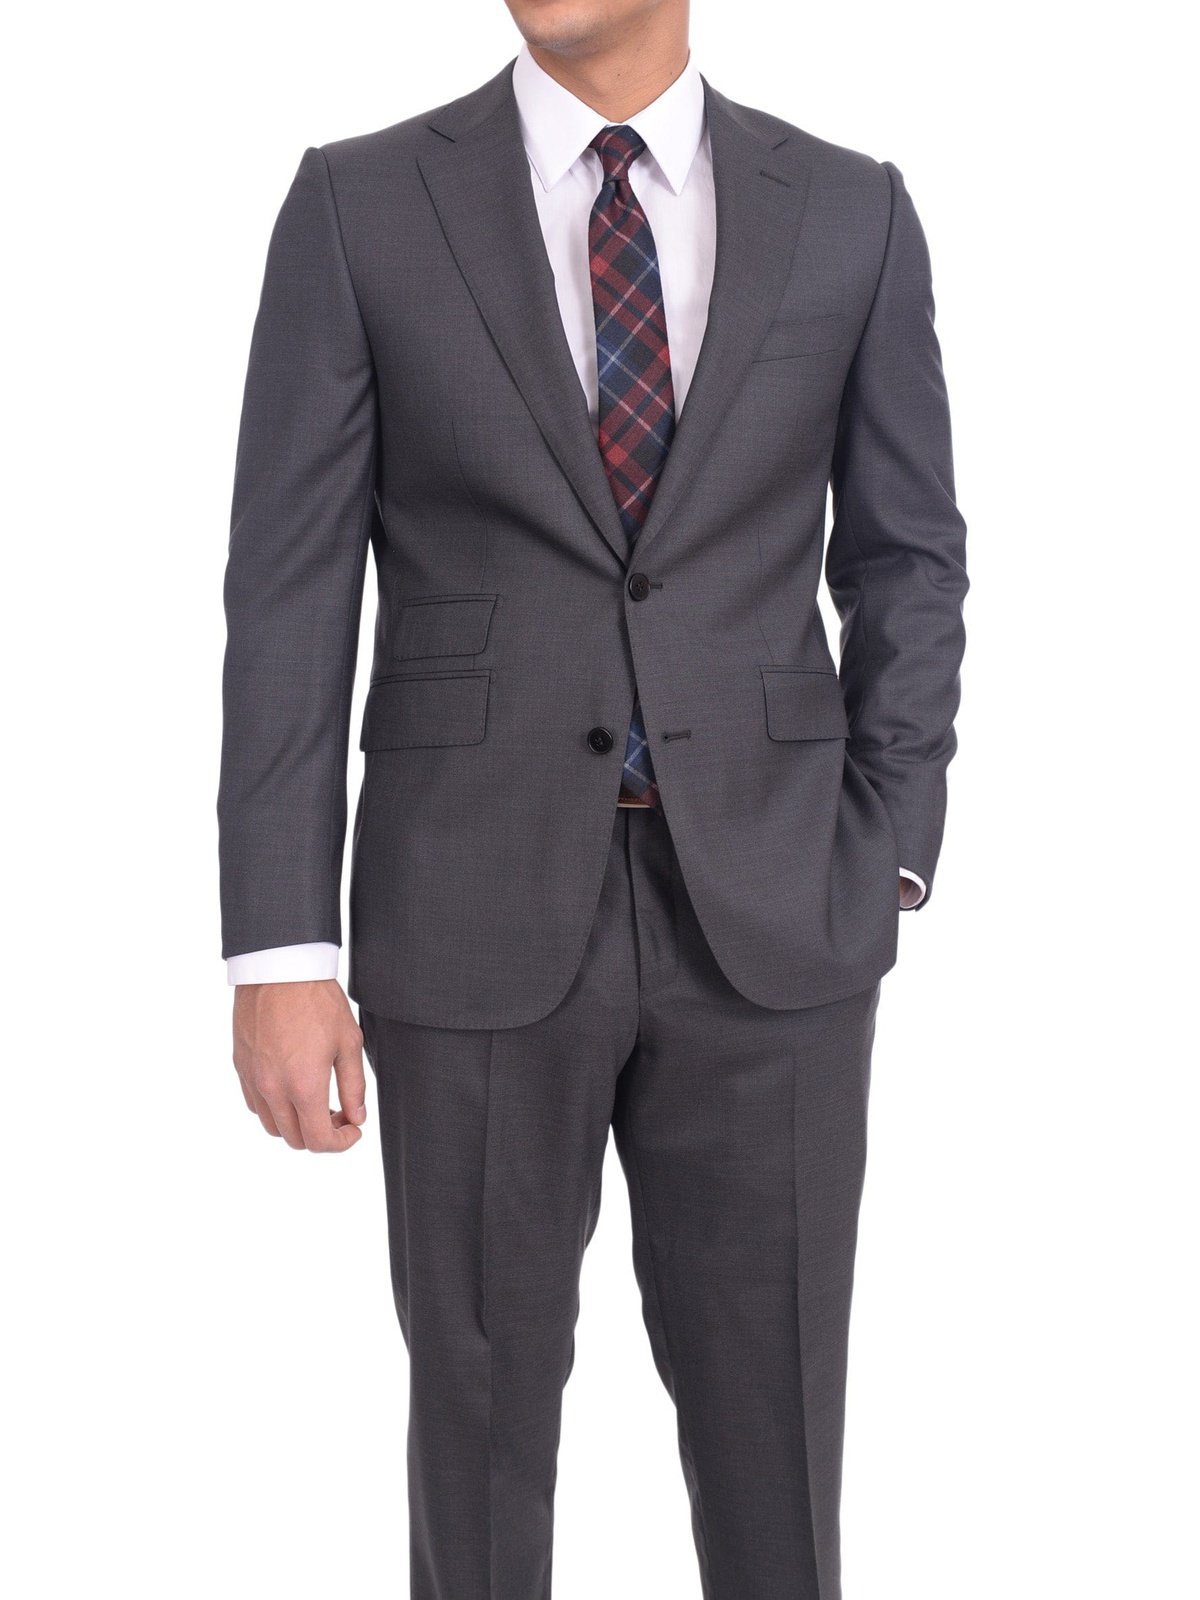 Napoli Sale Suits Mens Napoli Slim Fit Charcoal Gray Half Canvassed Italian Marzotto Wool Suit